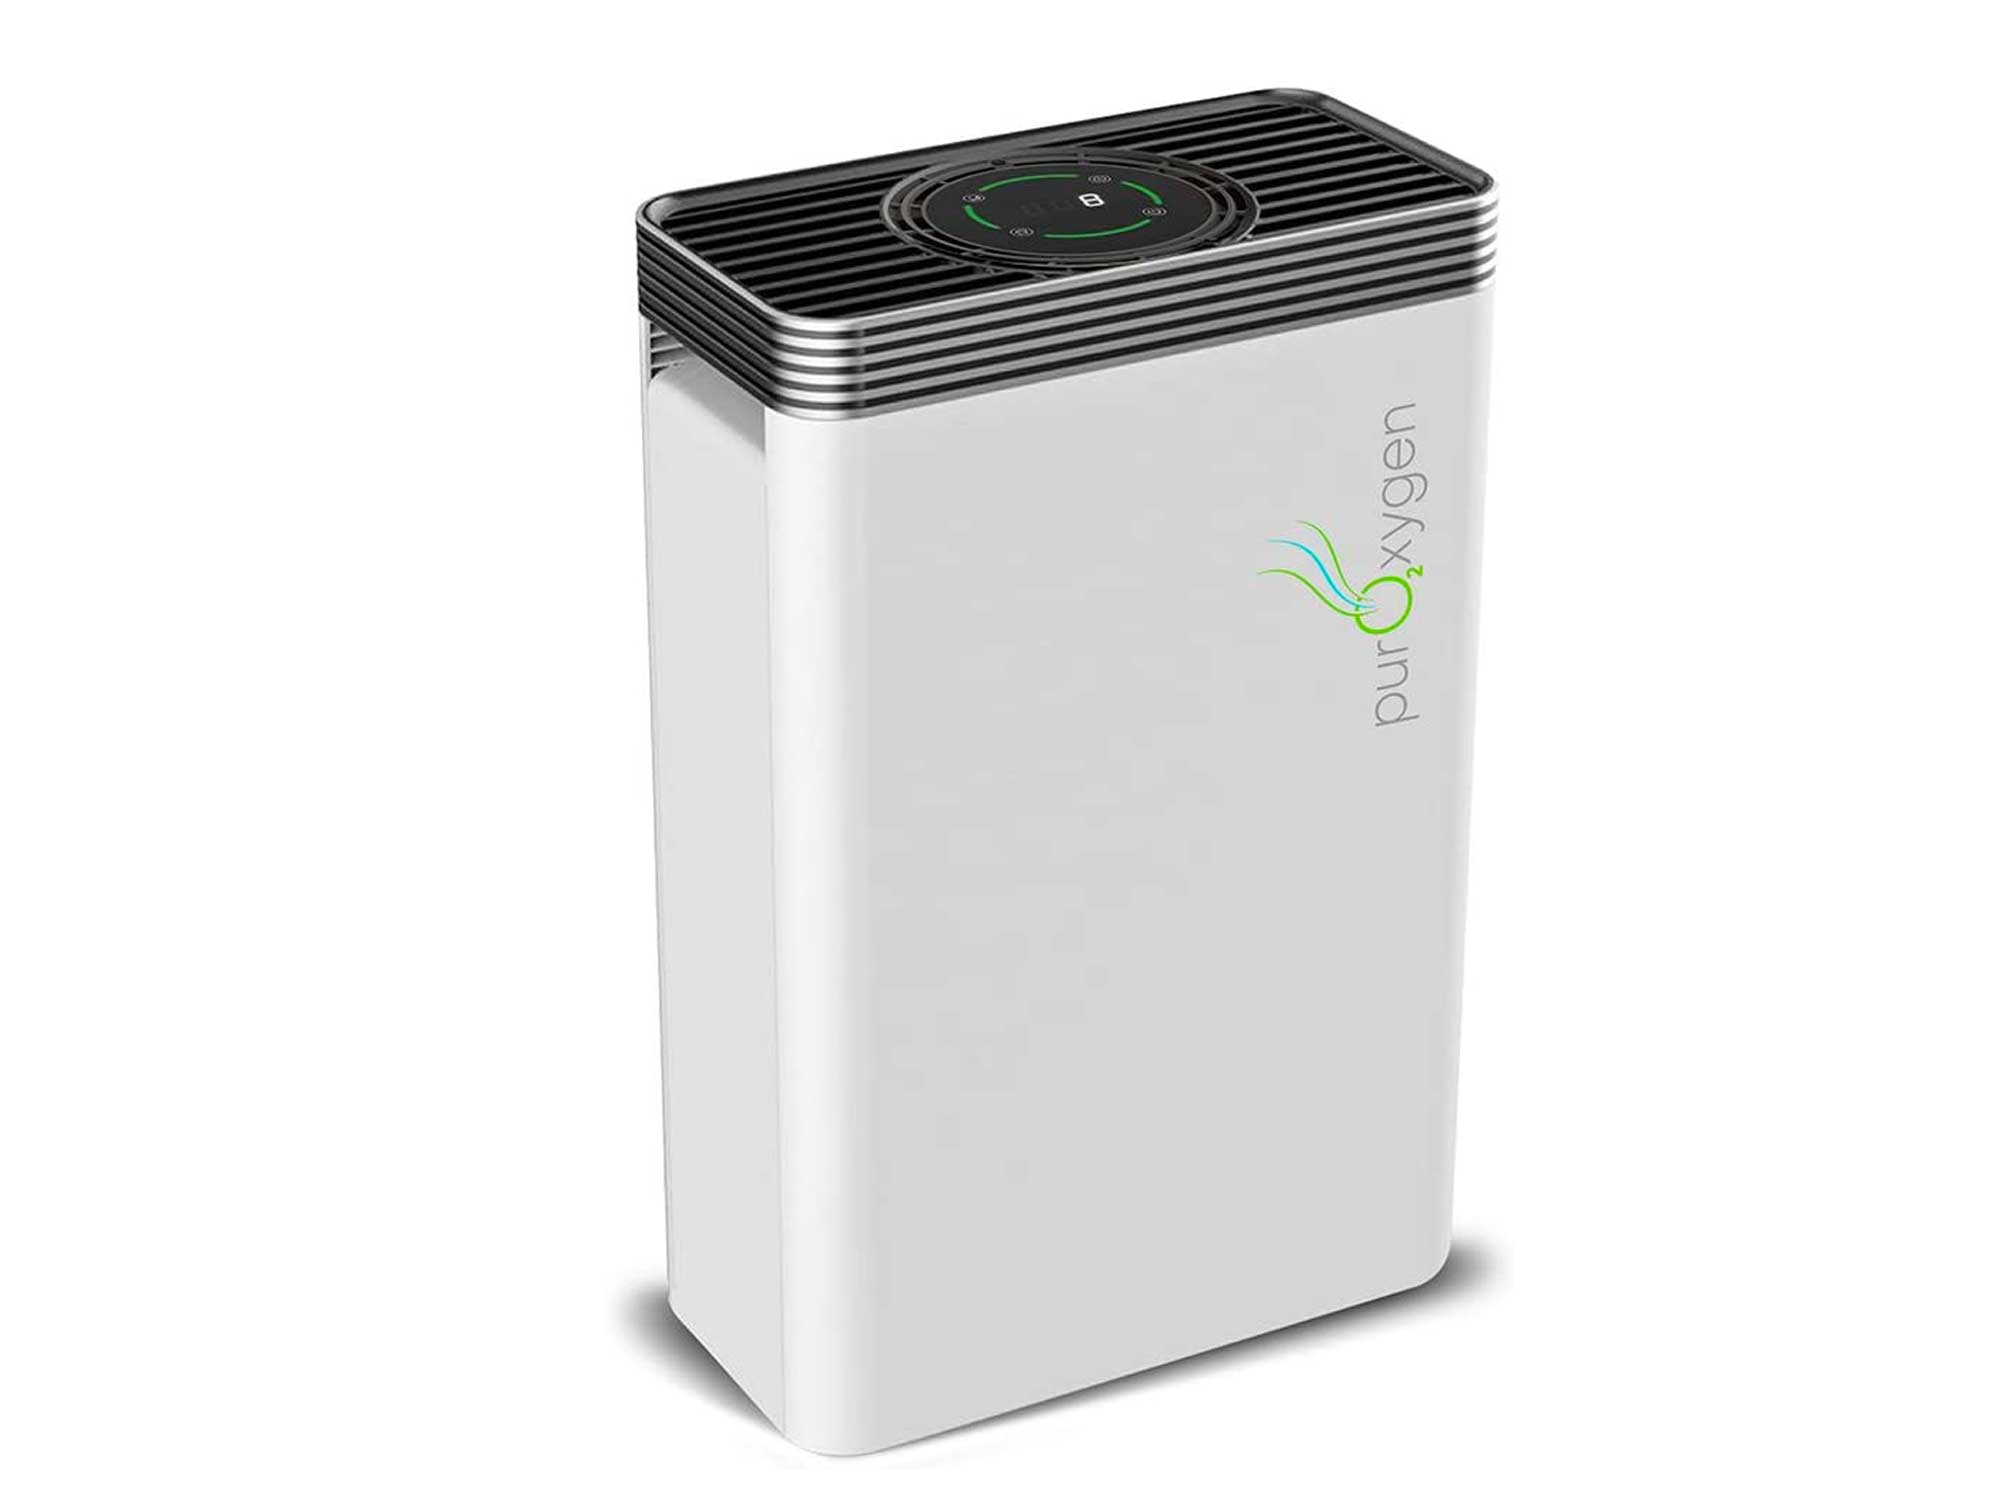 PURO²XYGEN P500 - High Performance Air Purifier for Home, Up to 550 sq ft Large Room HEPA Air Cleaner, 6-Stage Purification System for Mold, Dust, Pet Dander, Smoke, Low Noise, Night Light